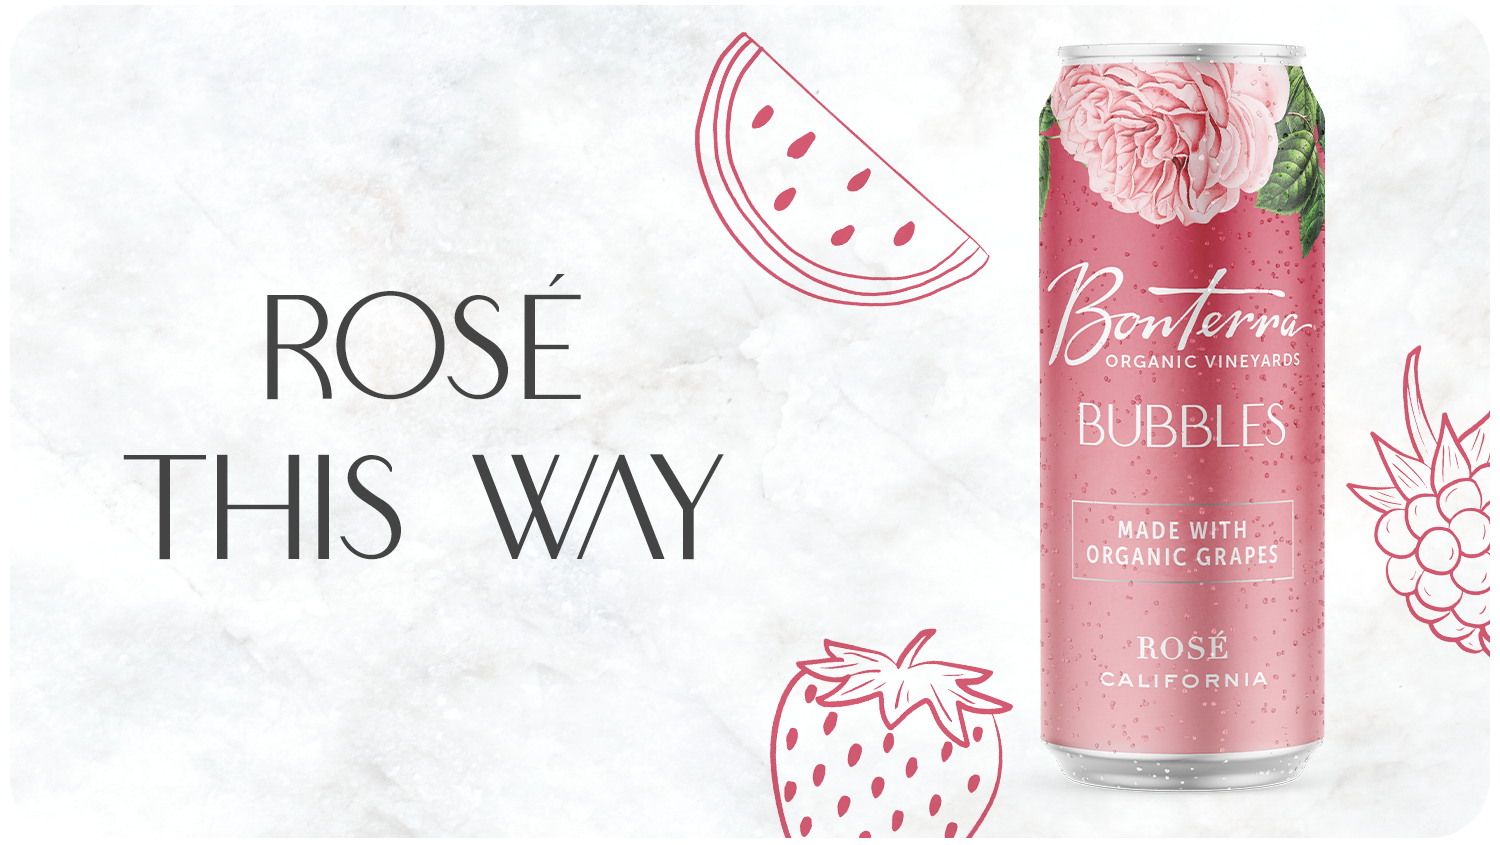 Lively raspberry, strawberry and watermelon notes elevate our crisp California Rosé. On the palate, refreshing rosewater and lime zest notes brighten this bubbly selection from organic grapes.